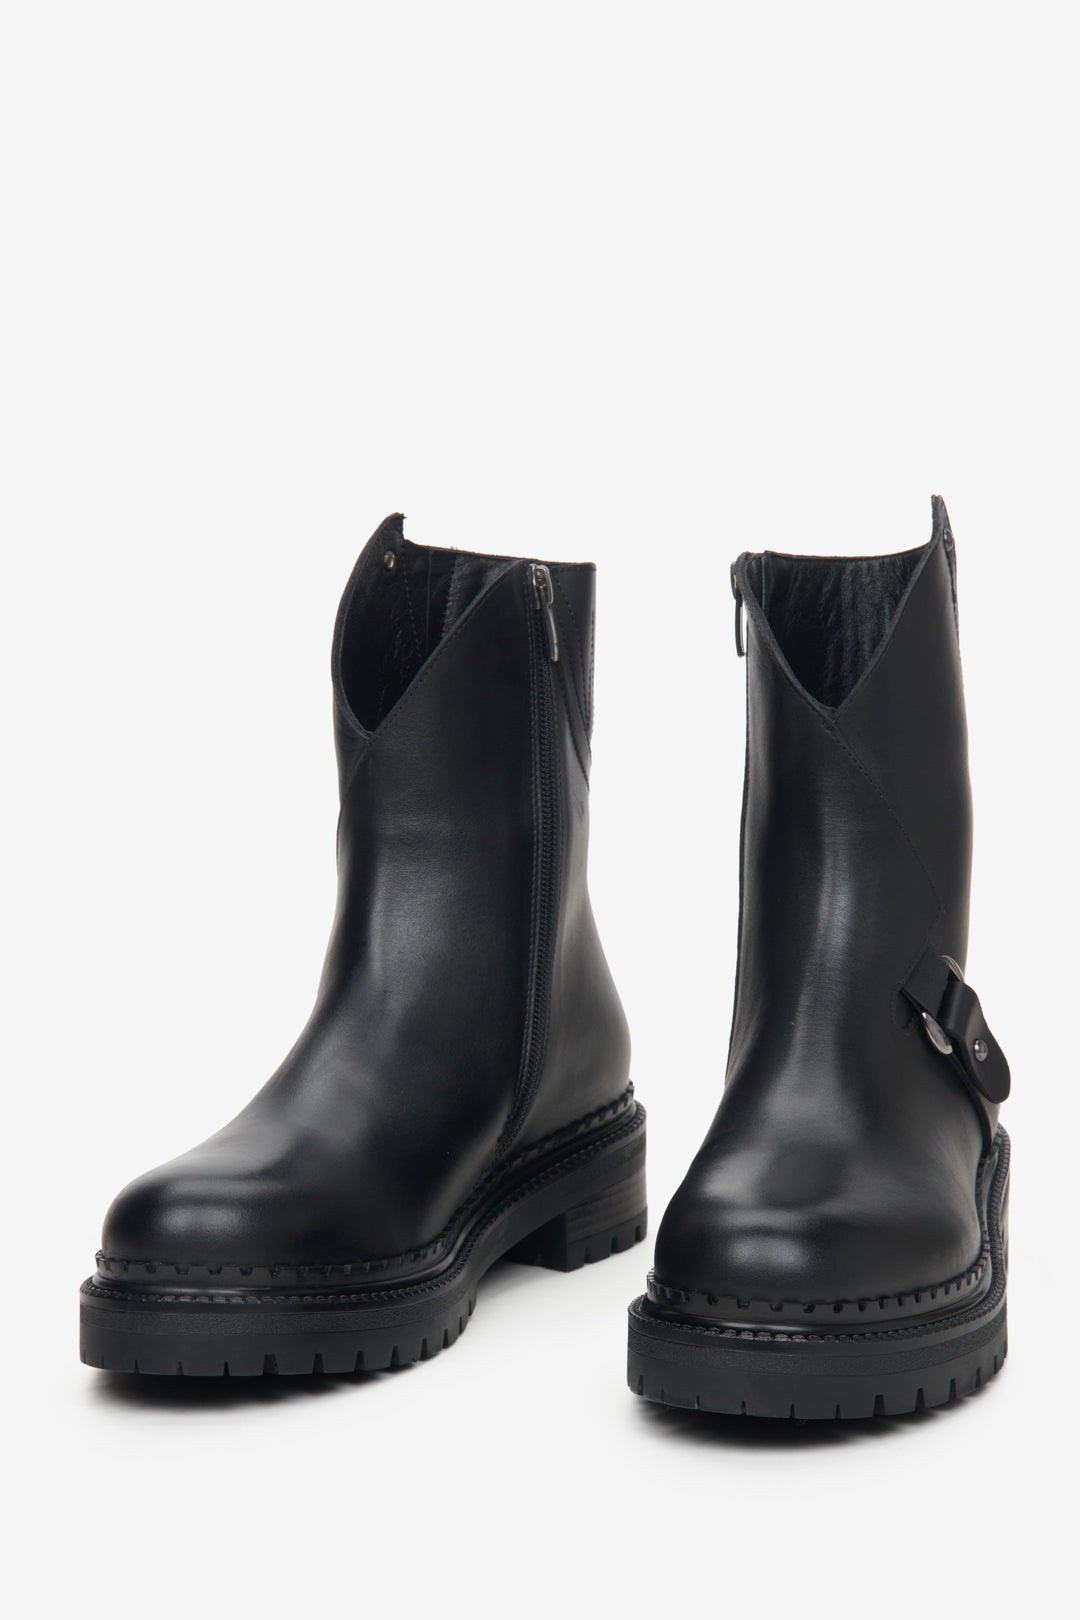 Women's black leather ankle boots, elegantly cropped - presentation of the tip of the shoe.